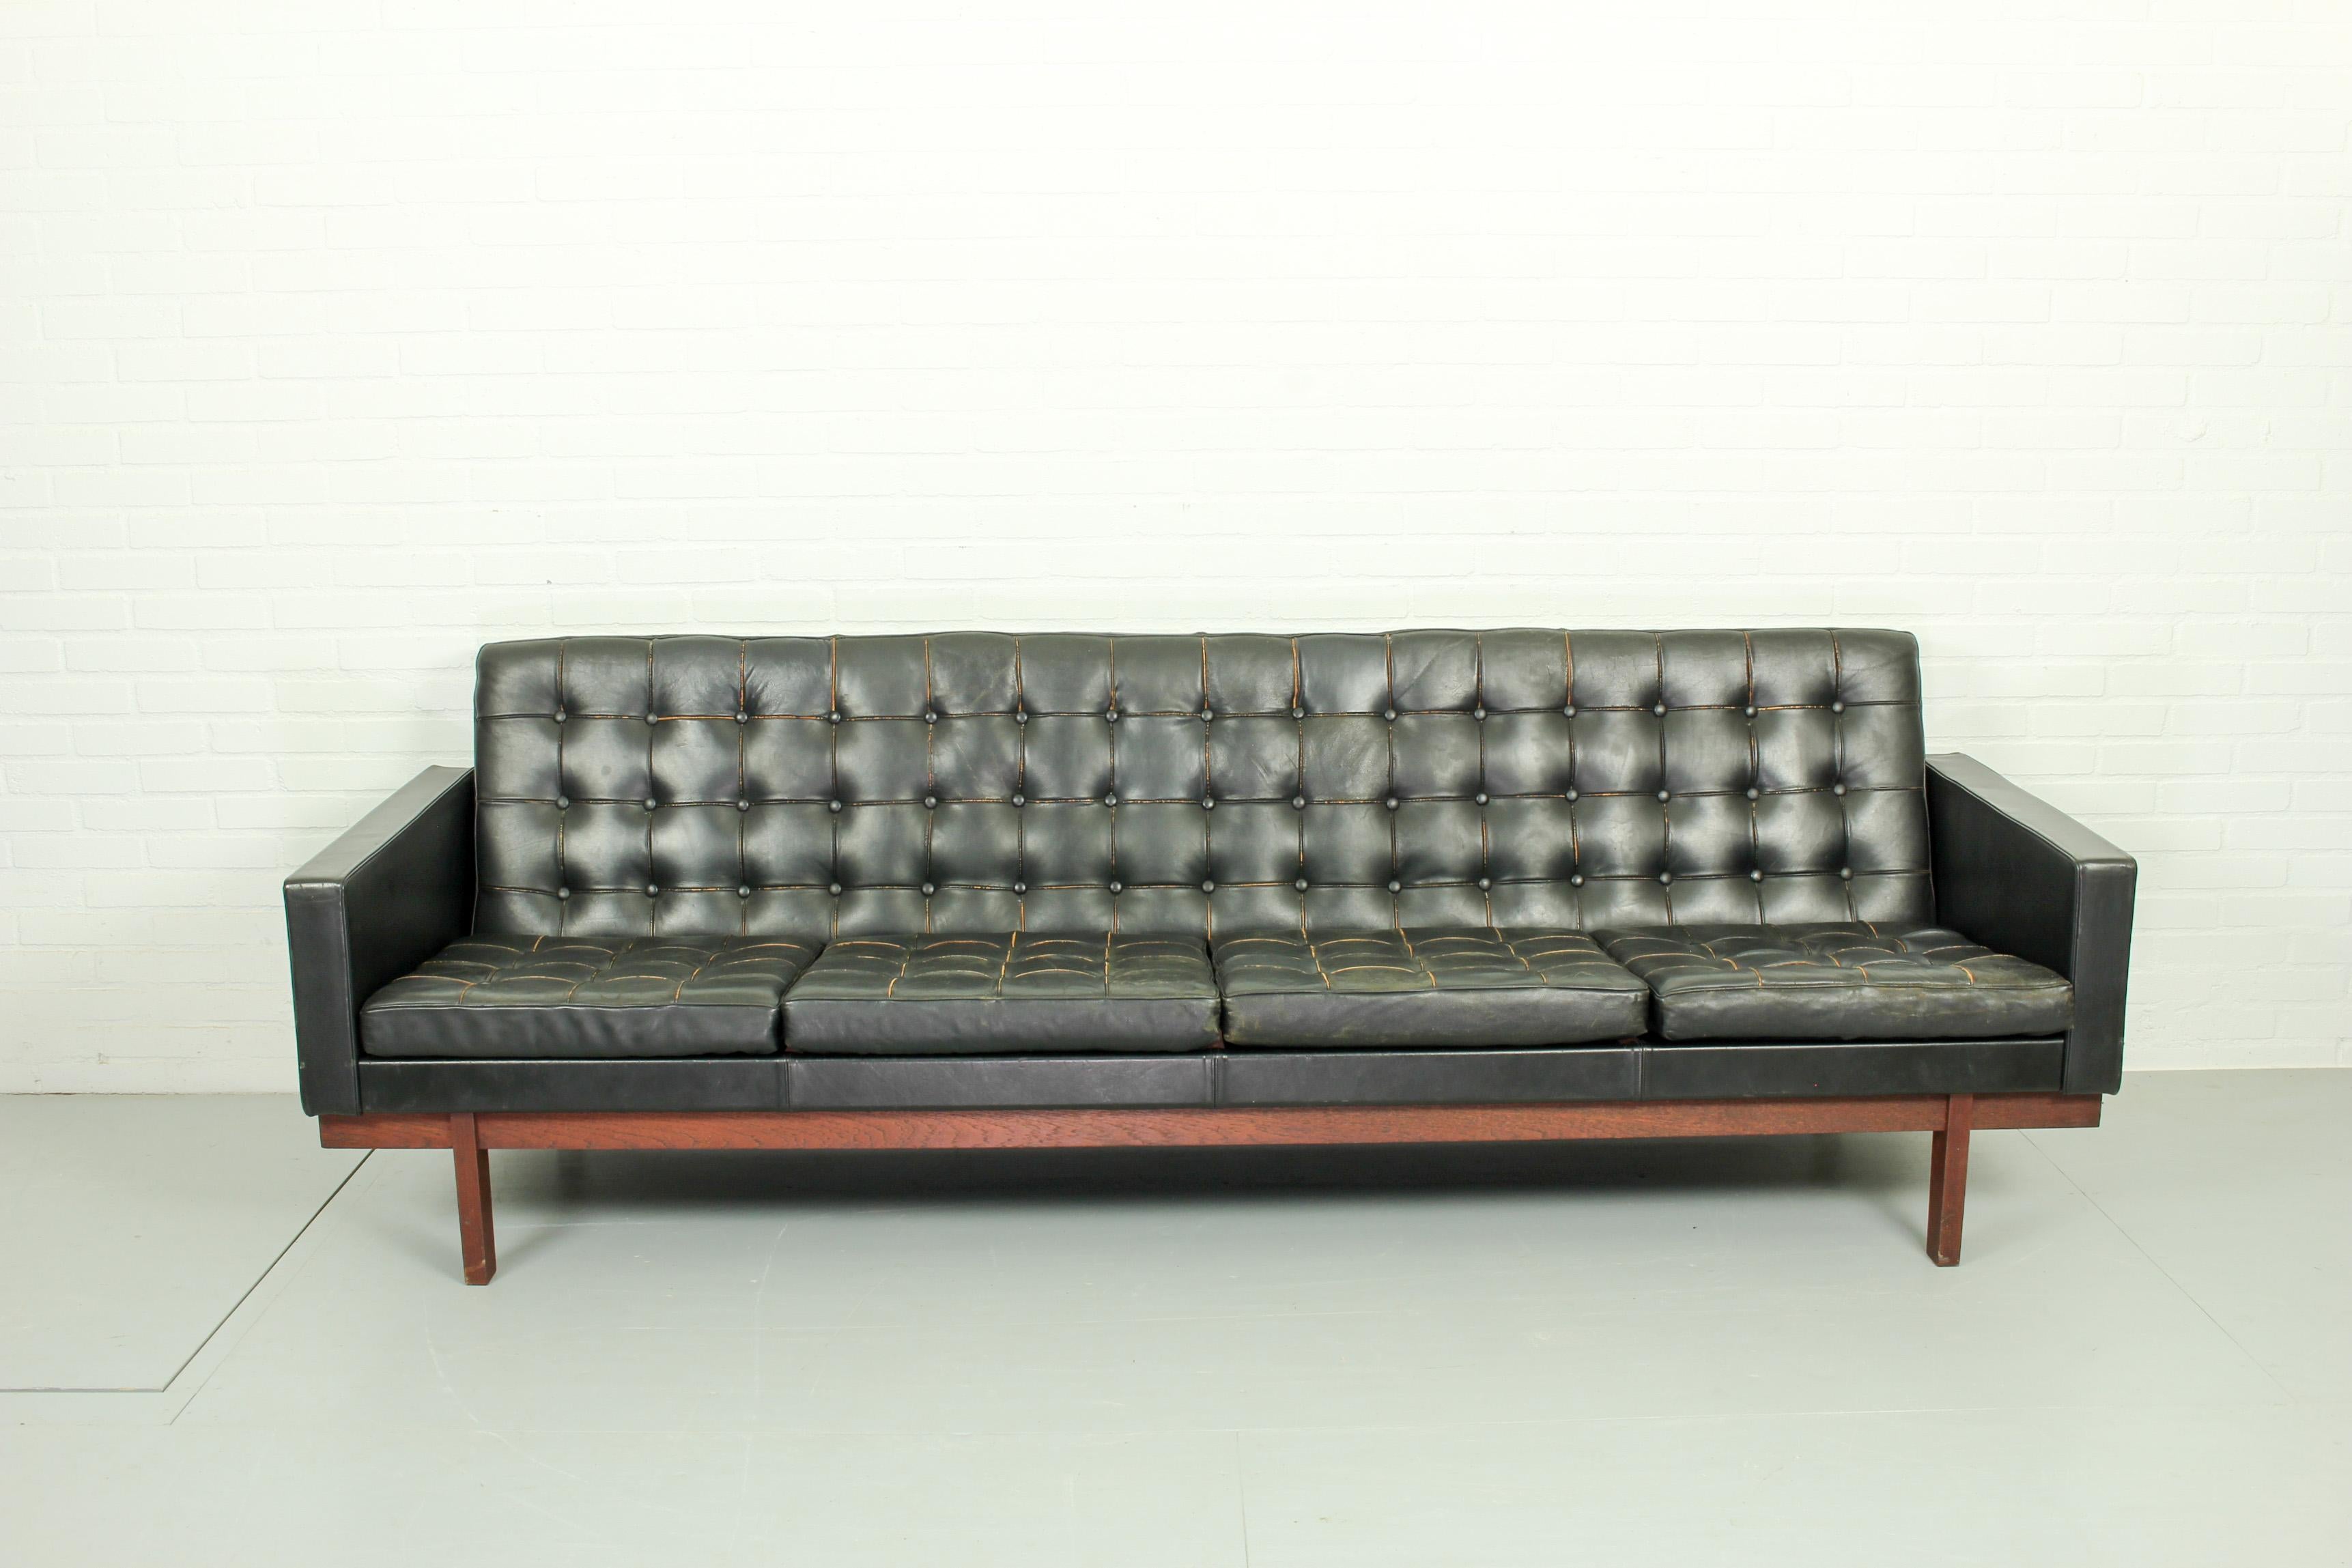 A very very rare complete set of black leather 4-*seat sofa and 2 matching lounge chairs by Karl Erik Ekselius circa 1960. Sofas by Ekselius, a Swedish designer, are rare to the market. Produced by JOC in Sweden. This set certainly has patina and